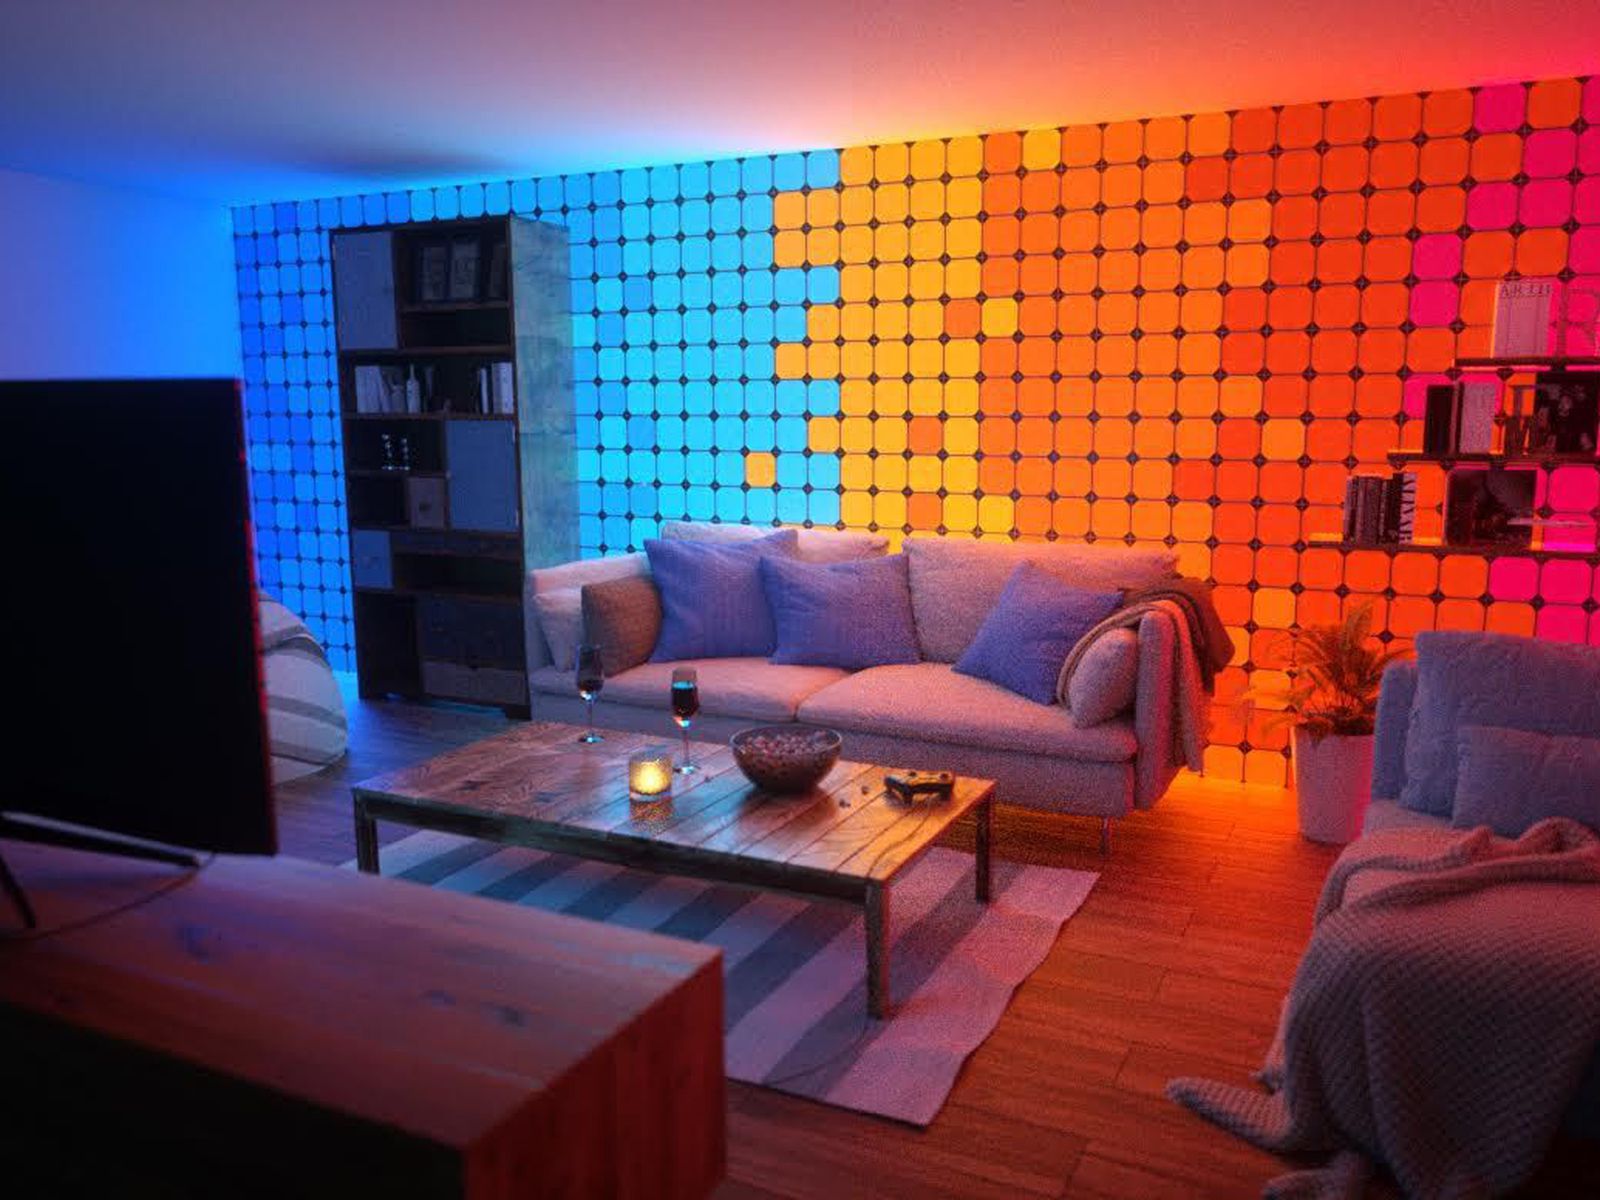 Nanoleaf Creates Square-Shaped Light Panels With Touch Controls -